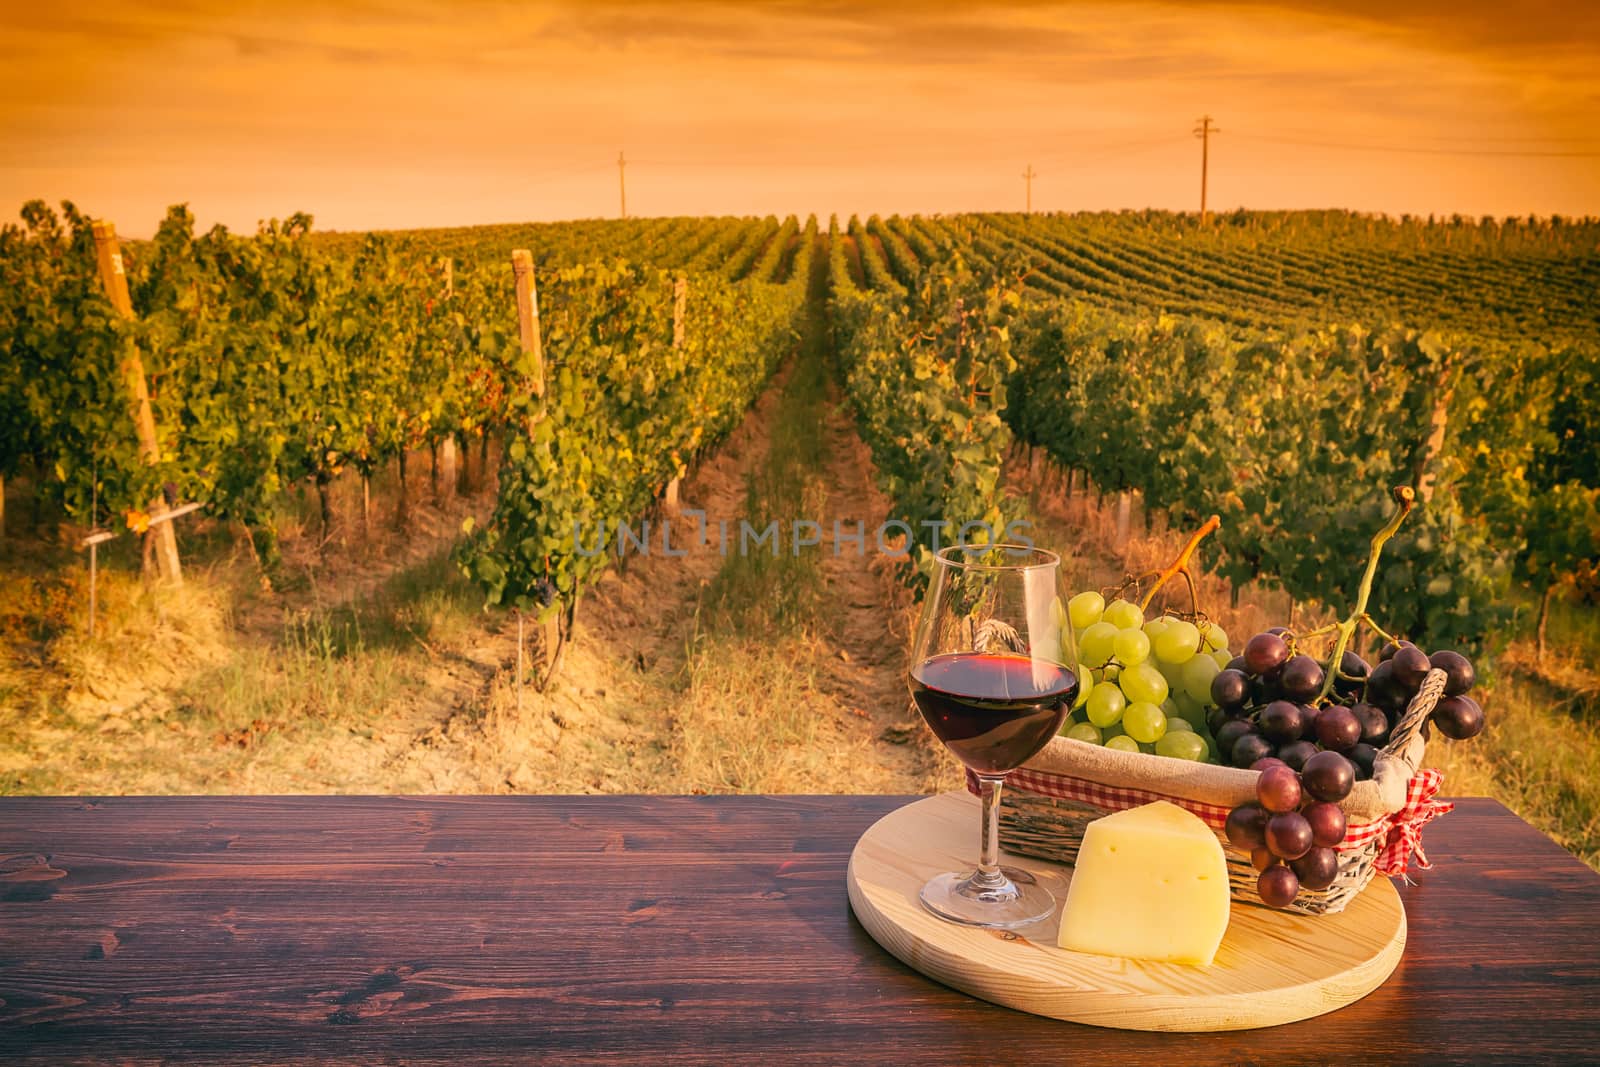 Glass of red wine in front of a vineyard at sunset by LuigiMorbidelli